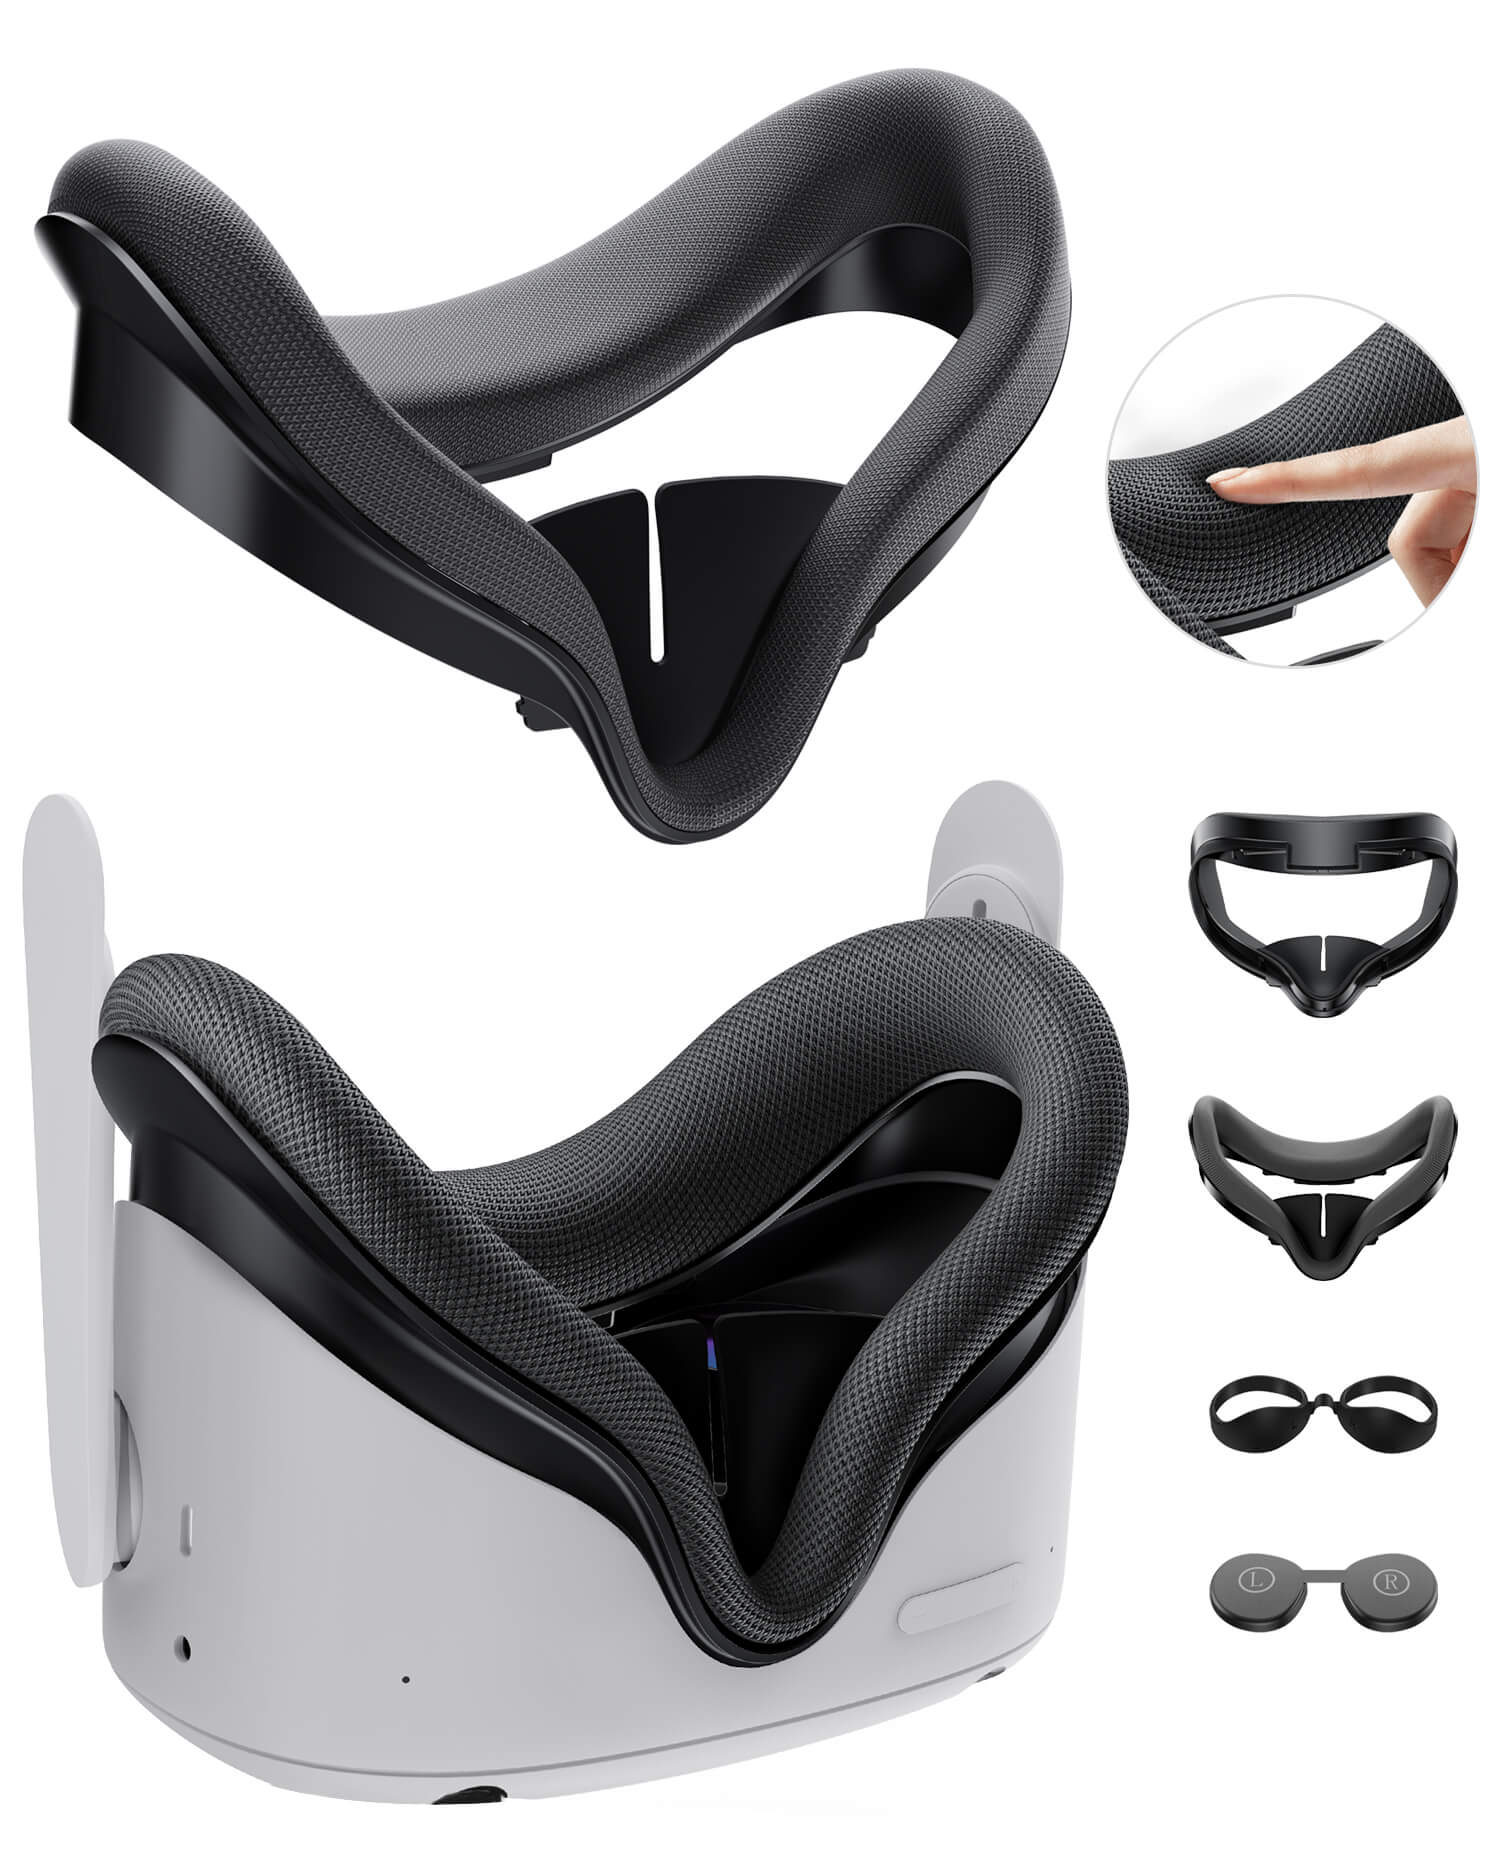 VR Cover for Meta/Oculus Quest 2 – VR Cover North America